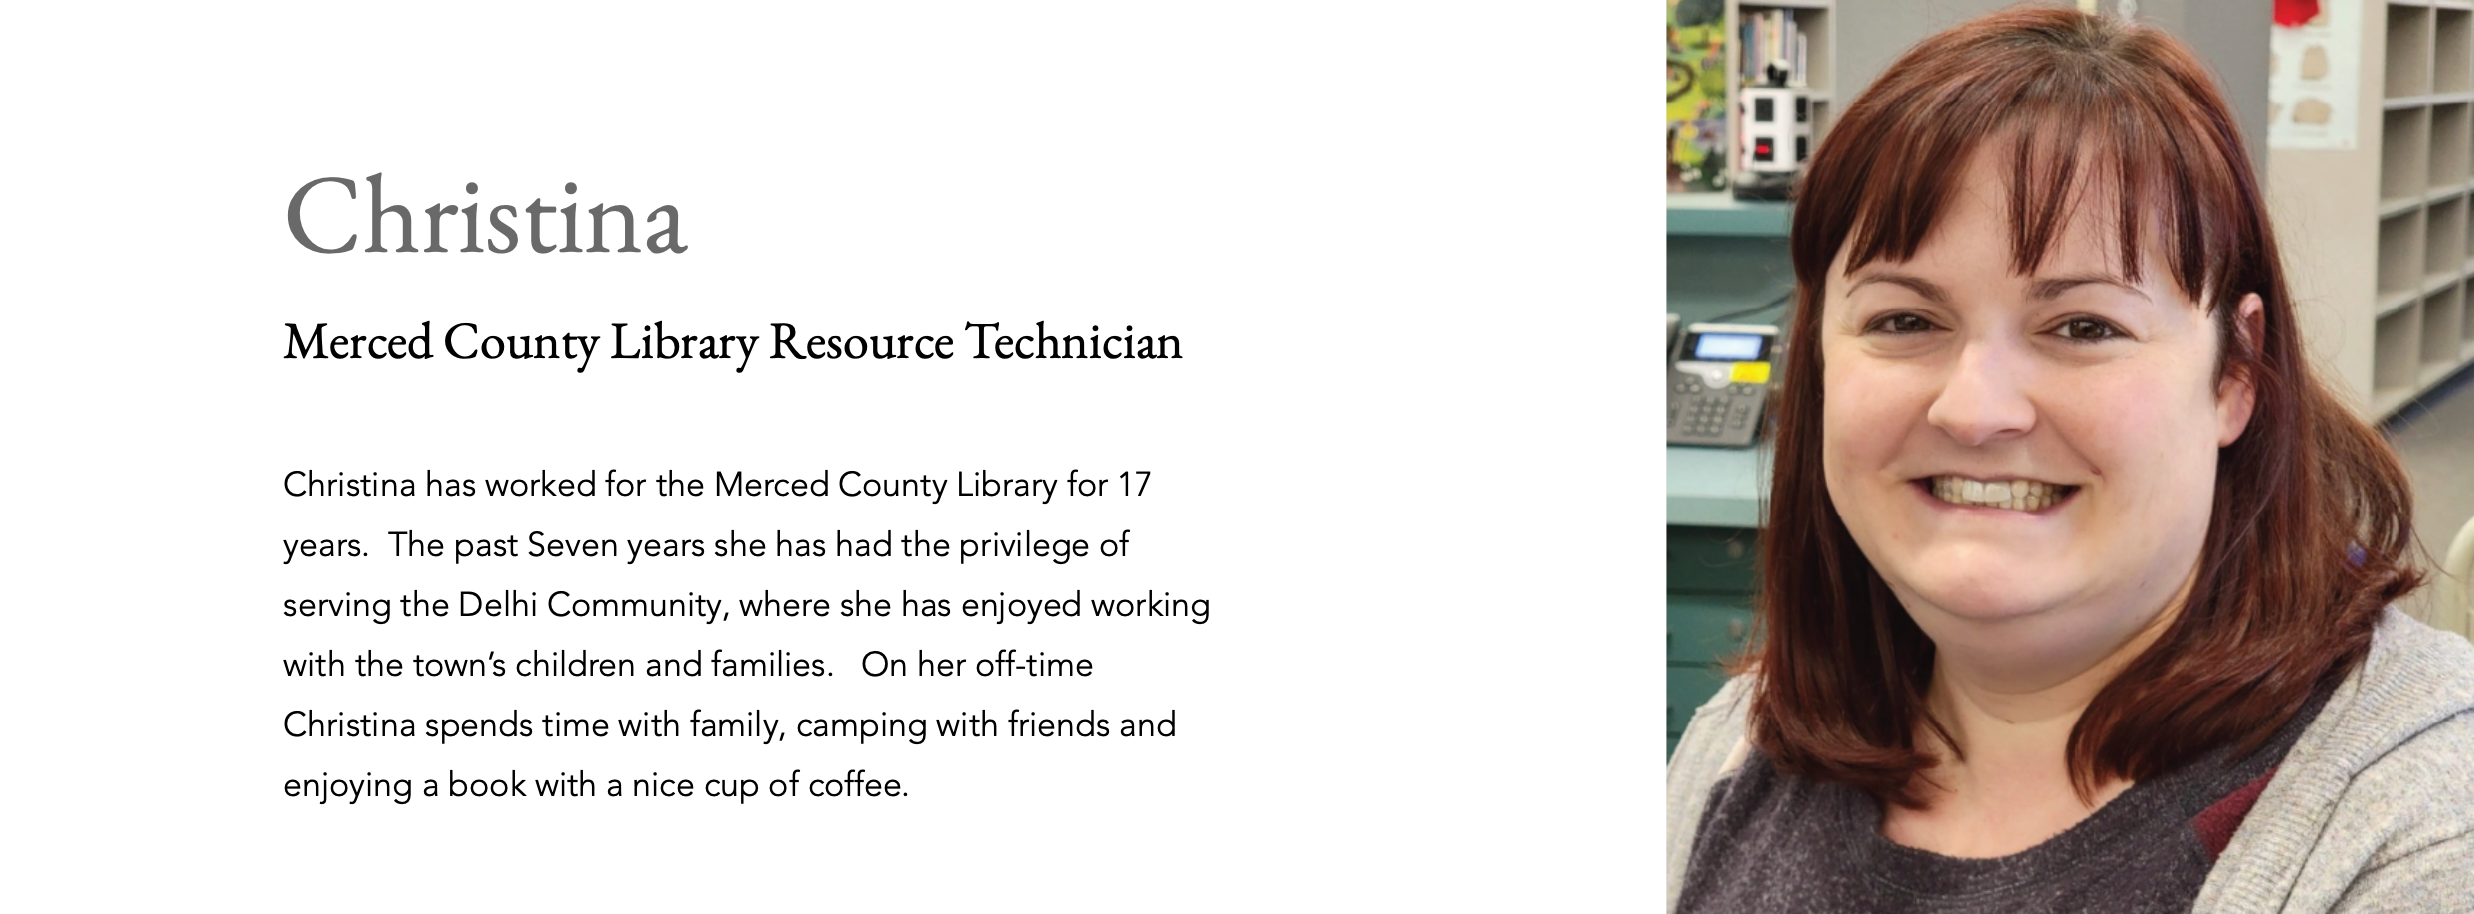 Christina Merced County Library Resource Technician Christina has worked for the Merced County Library for 17 years.  The past Seven years she has had the privilege of serving the Delhi Community, where she has enjoyed working with the town’s children and families.   On her off-time Christina spends time with family, camping with friends and enjoying a book with a nice cup of coffee. 